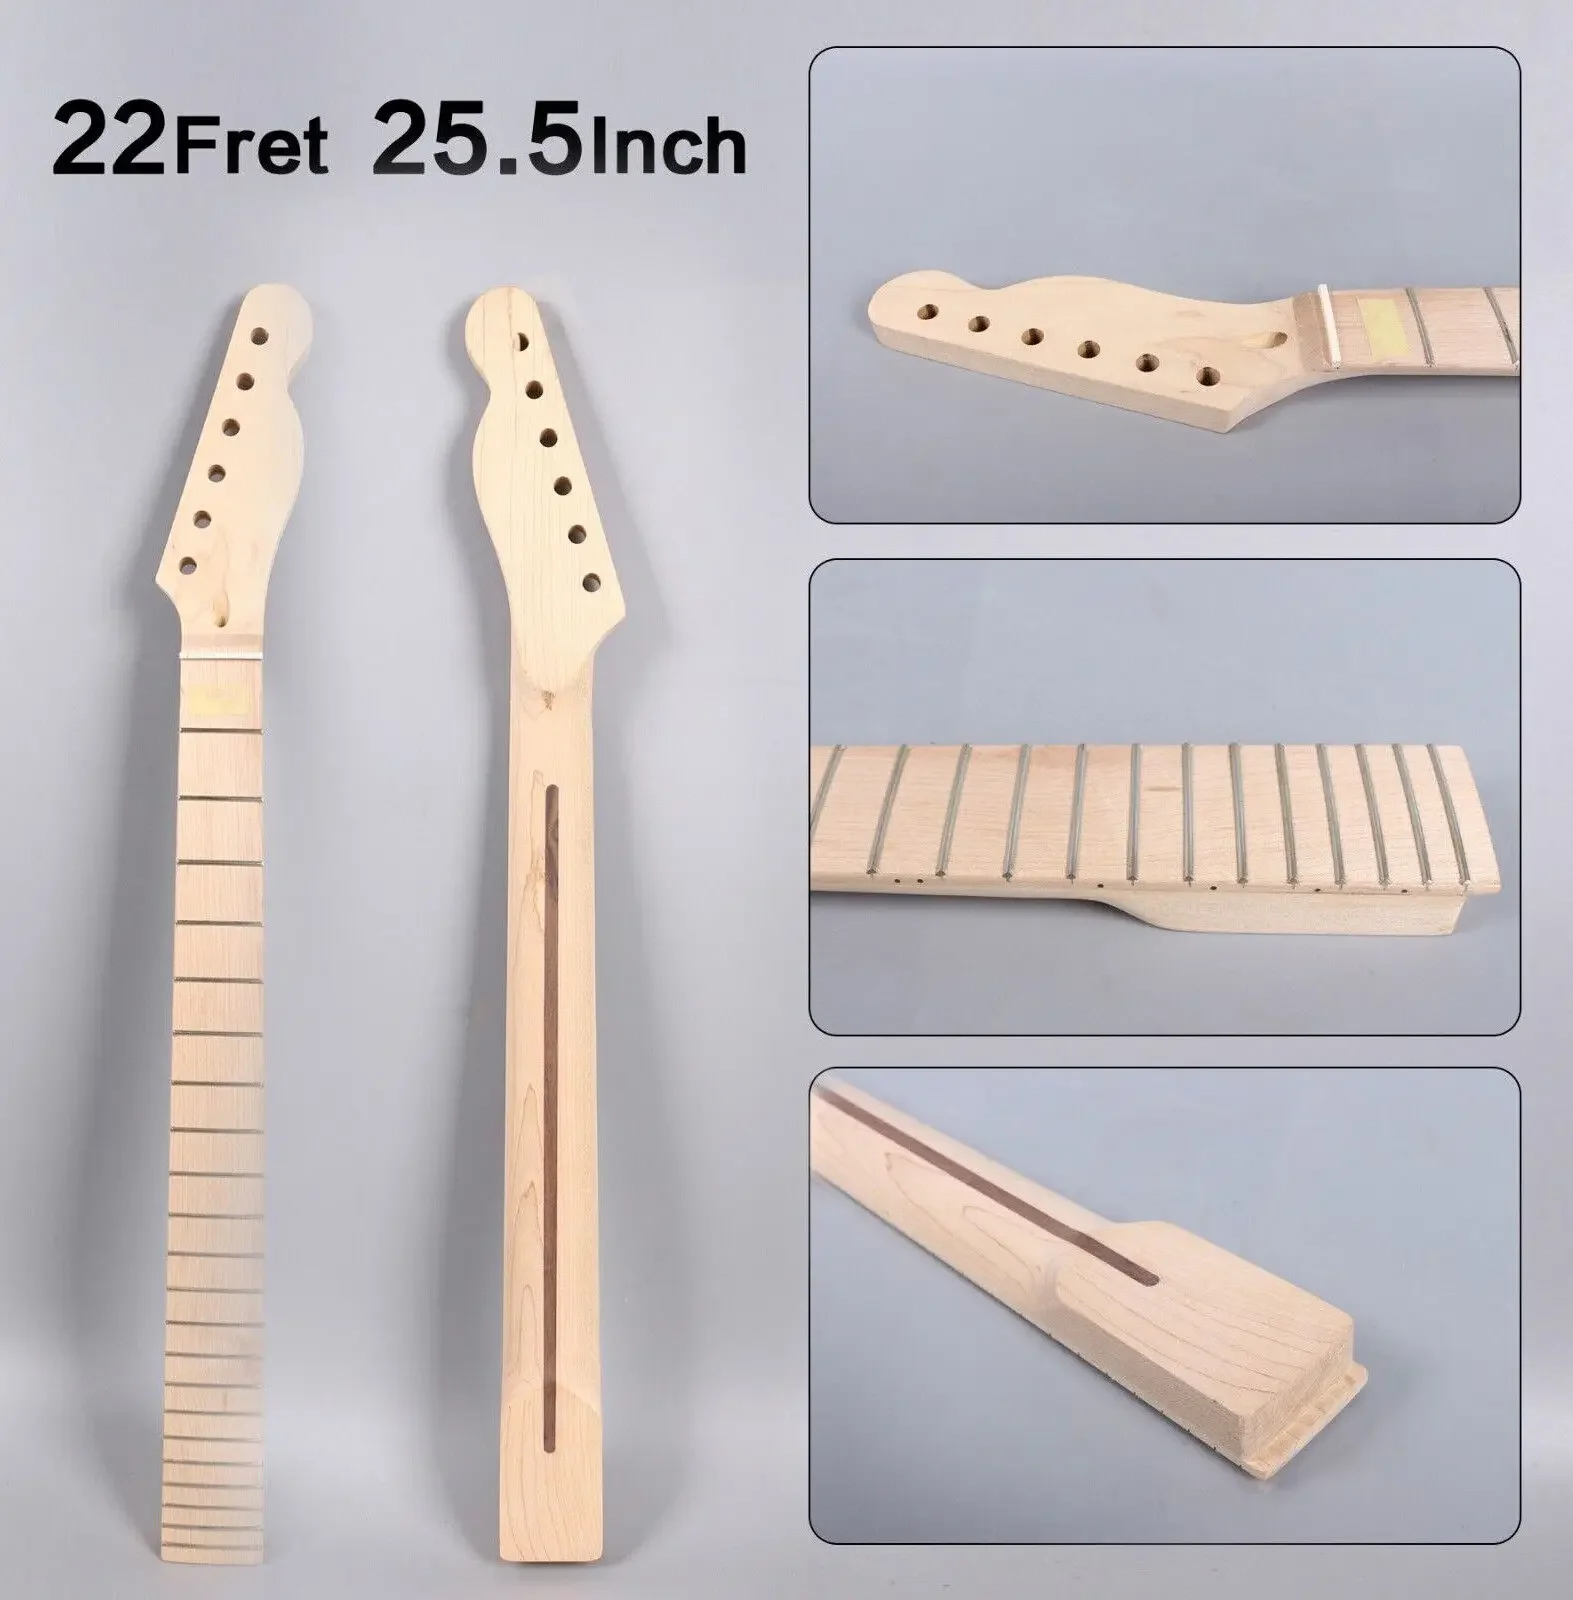 

22 Fret Guitar Neck 25.5 Inch Maple Fretboard Truss Rod Adjust at Headstock Replacement Head Bolt on Heel with Back Stripe